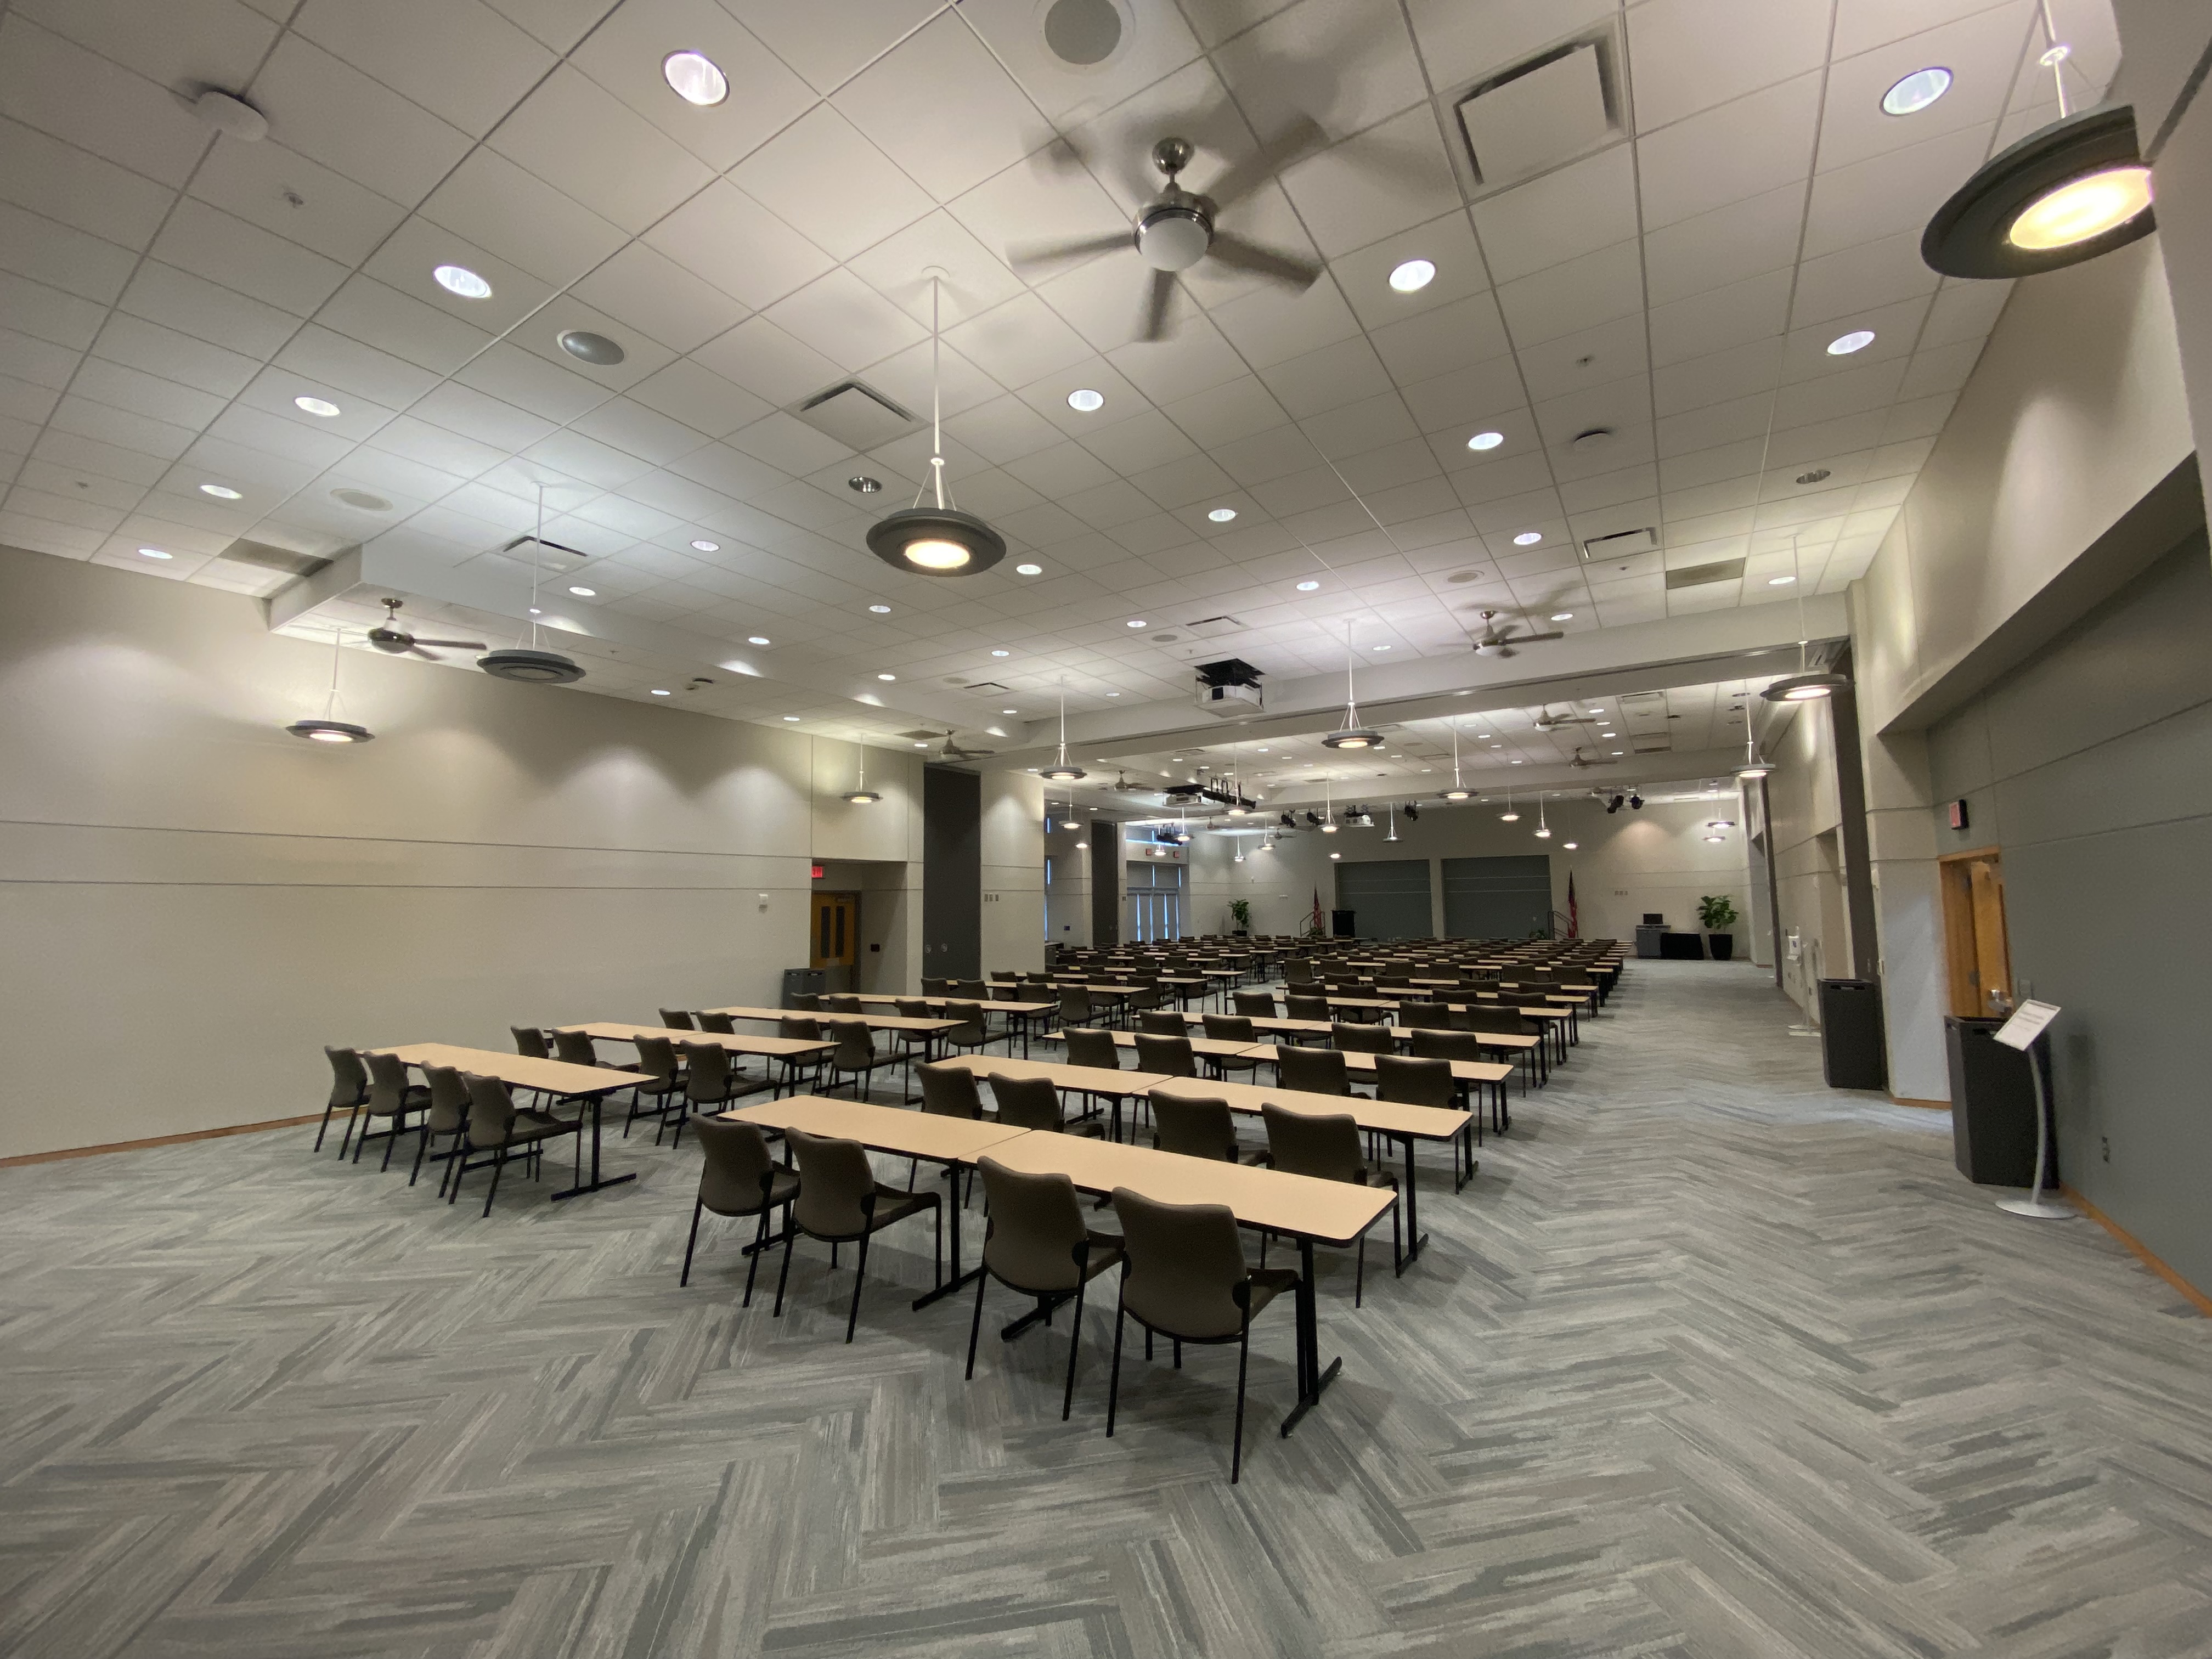 Classroom Setup of Conference Room